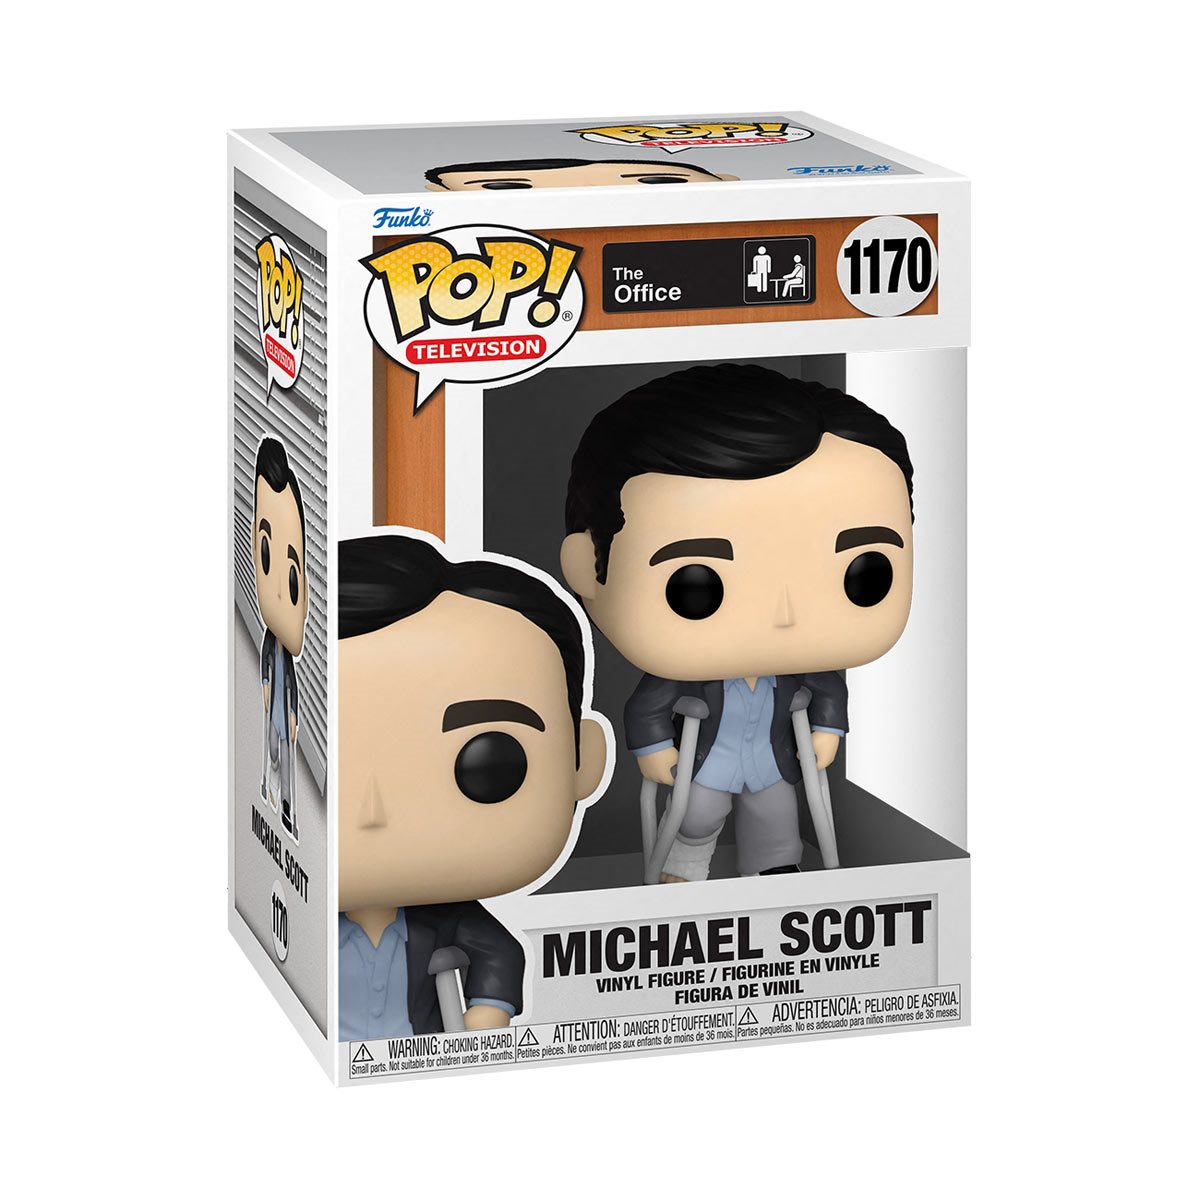 The Office - Michael Scott Standing with Crutches Pop! Vinyl Figure (1170)